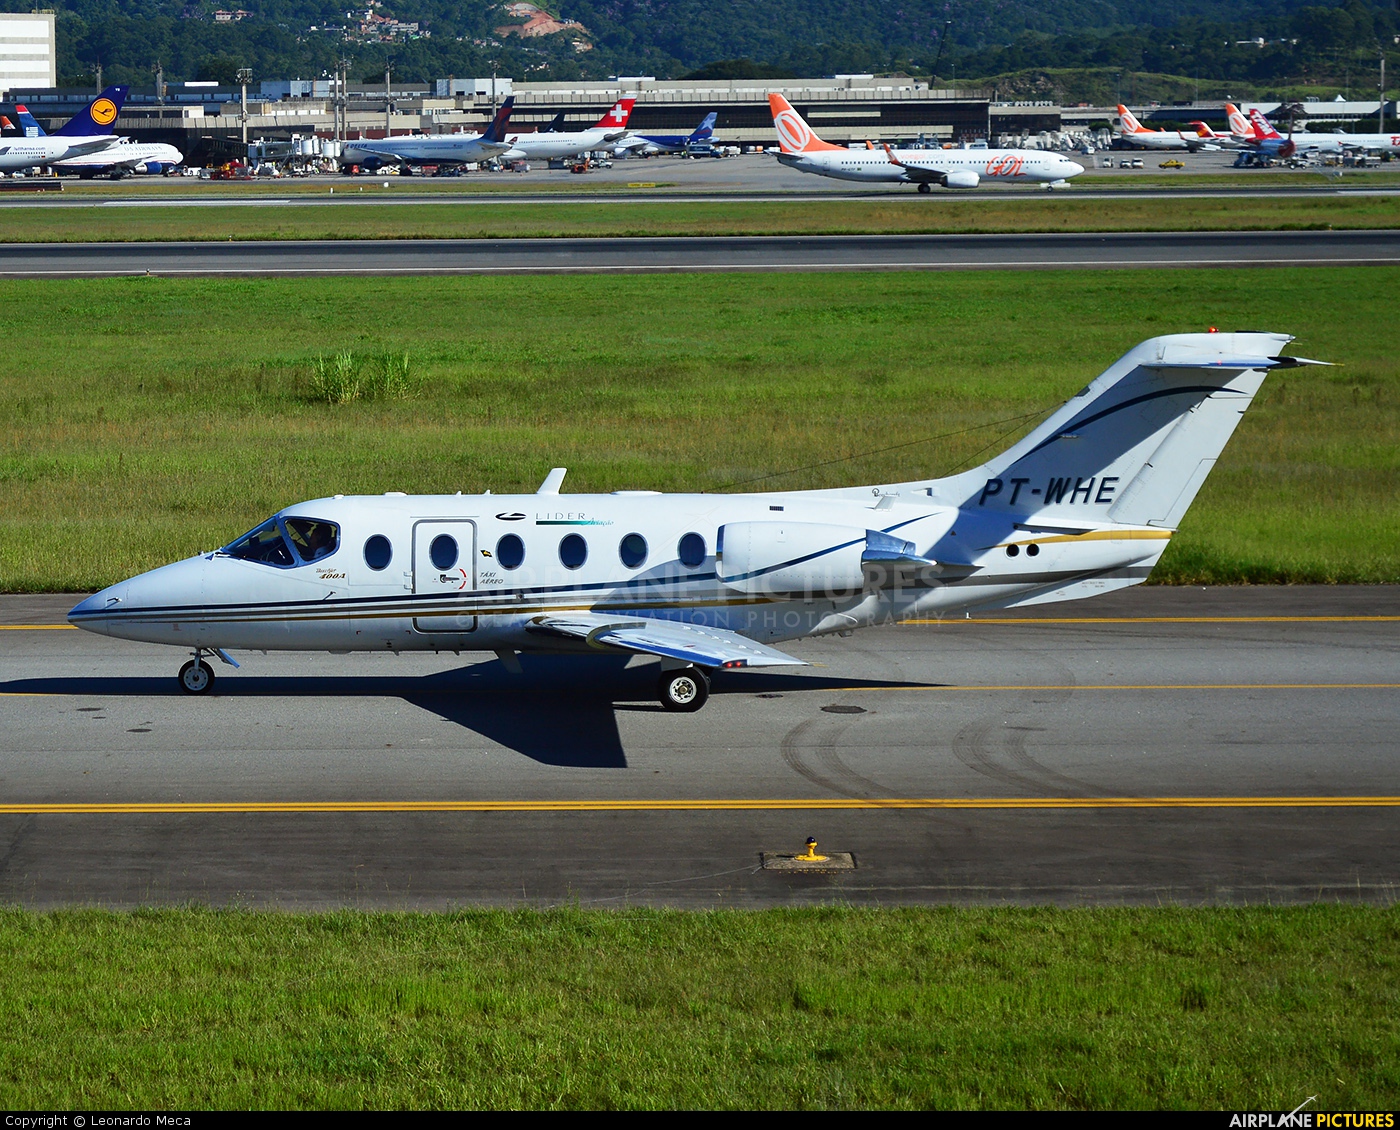 PT-WHE - Lider Taxi Aereo Hawker Beechcraft 400A Beechjet at São Paulo -  Guarulhos, Photo ID 358530